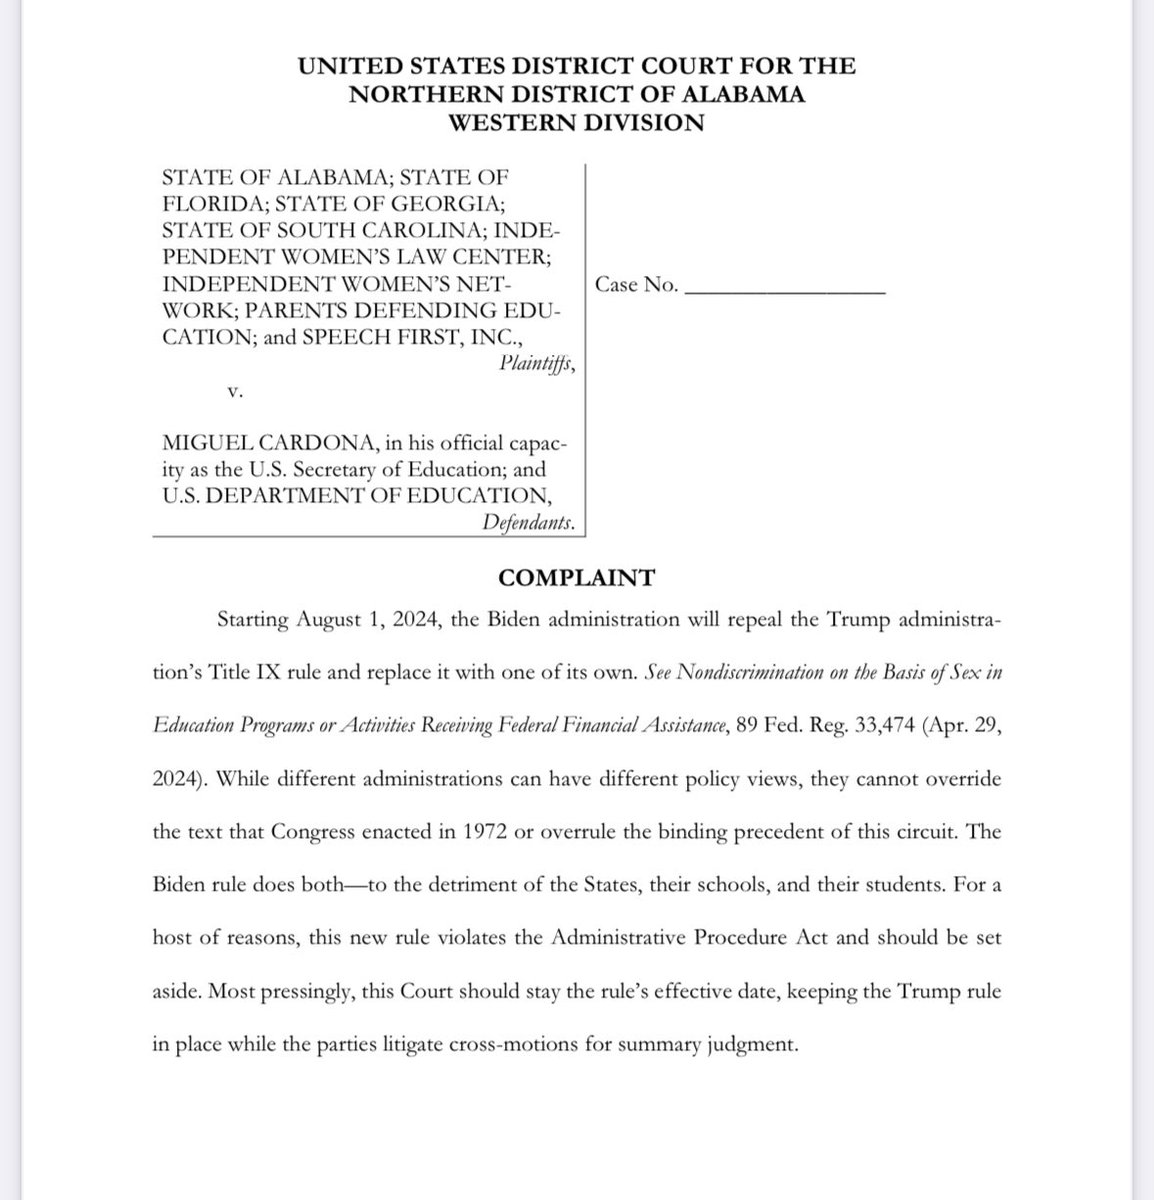 🚨BREAKING: @DefendingEd, @IWF, @Speech_First, and the states of Alabama, Georgia, Florida, and South Carolina just filed a landmark lawsuit against the Biden Administration over their illegal Title IX rewrite. The role of Cabinet agencies is to interpret laws as written by…